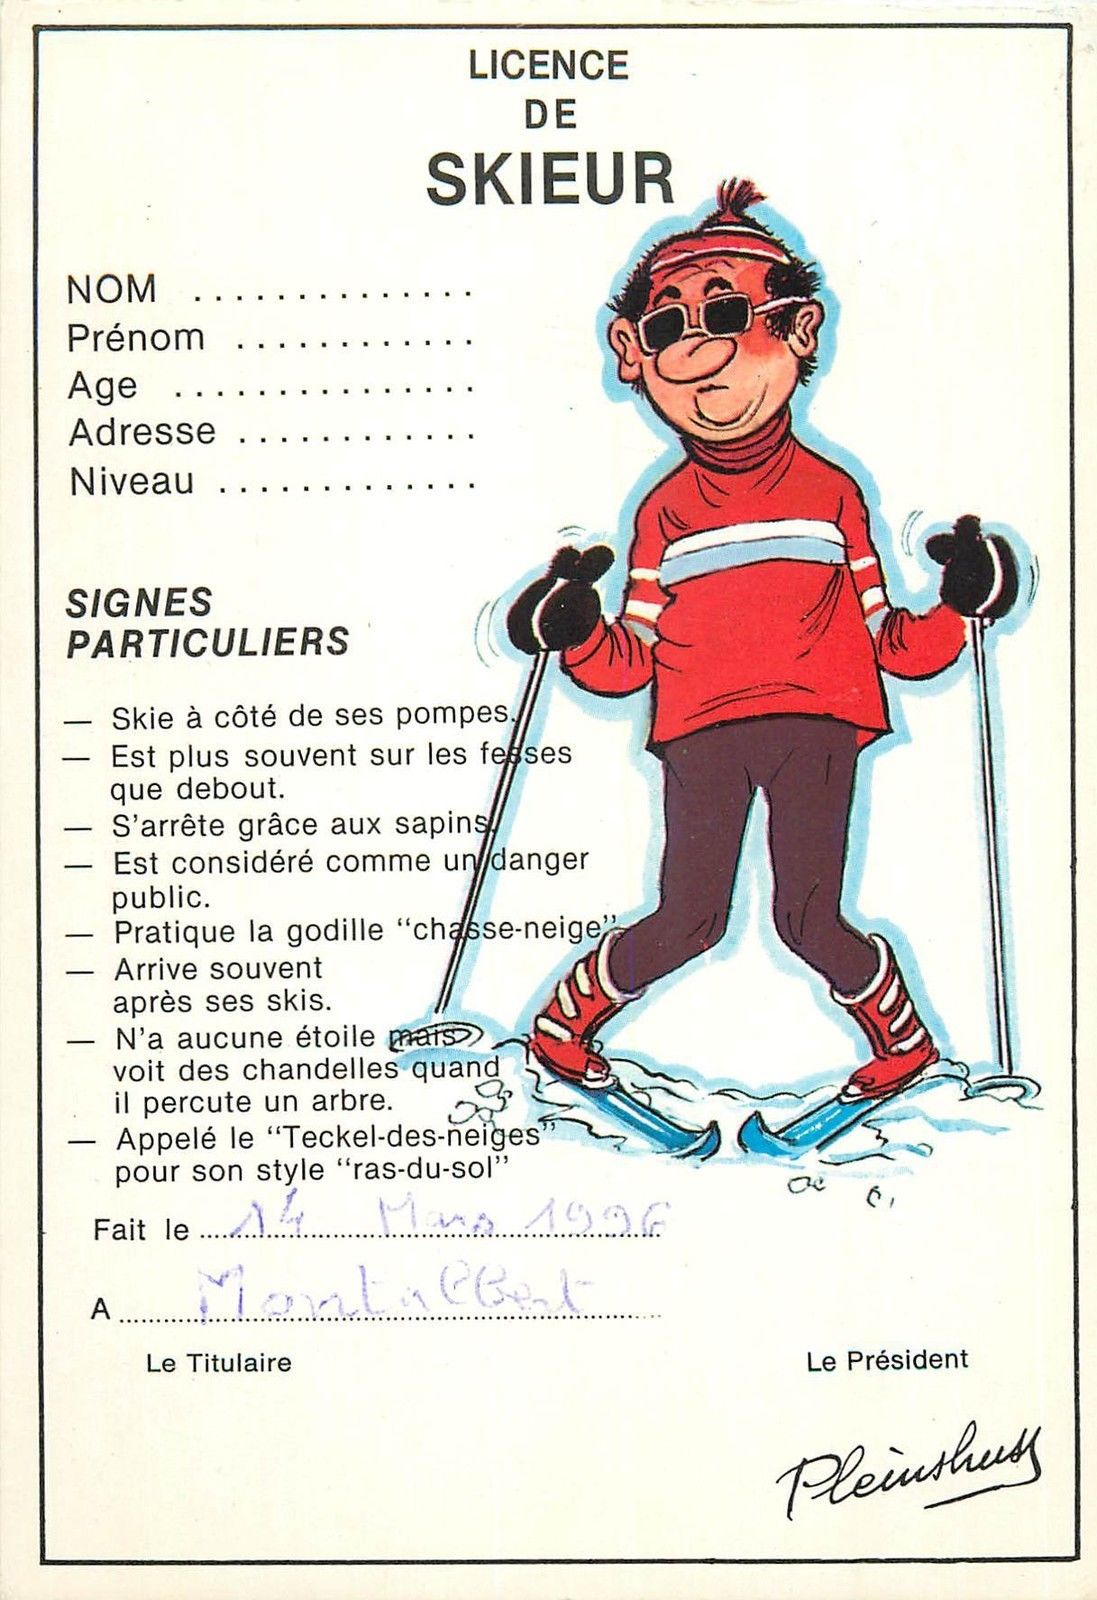 French Humour Ski Licence Caricature French Text Hippostcard